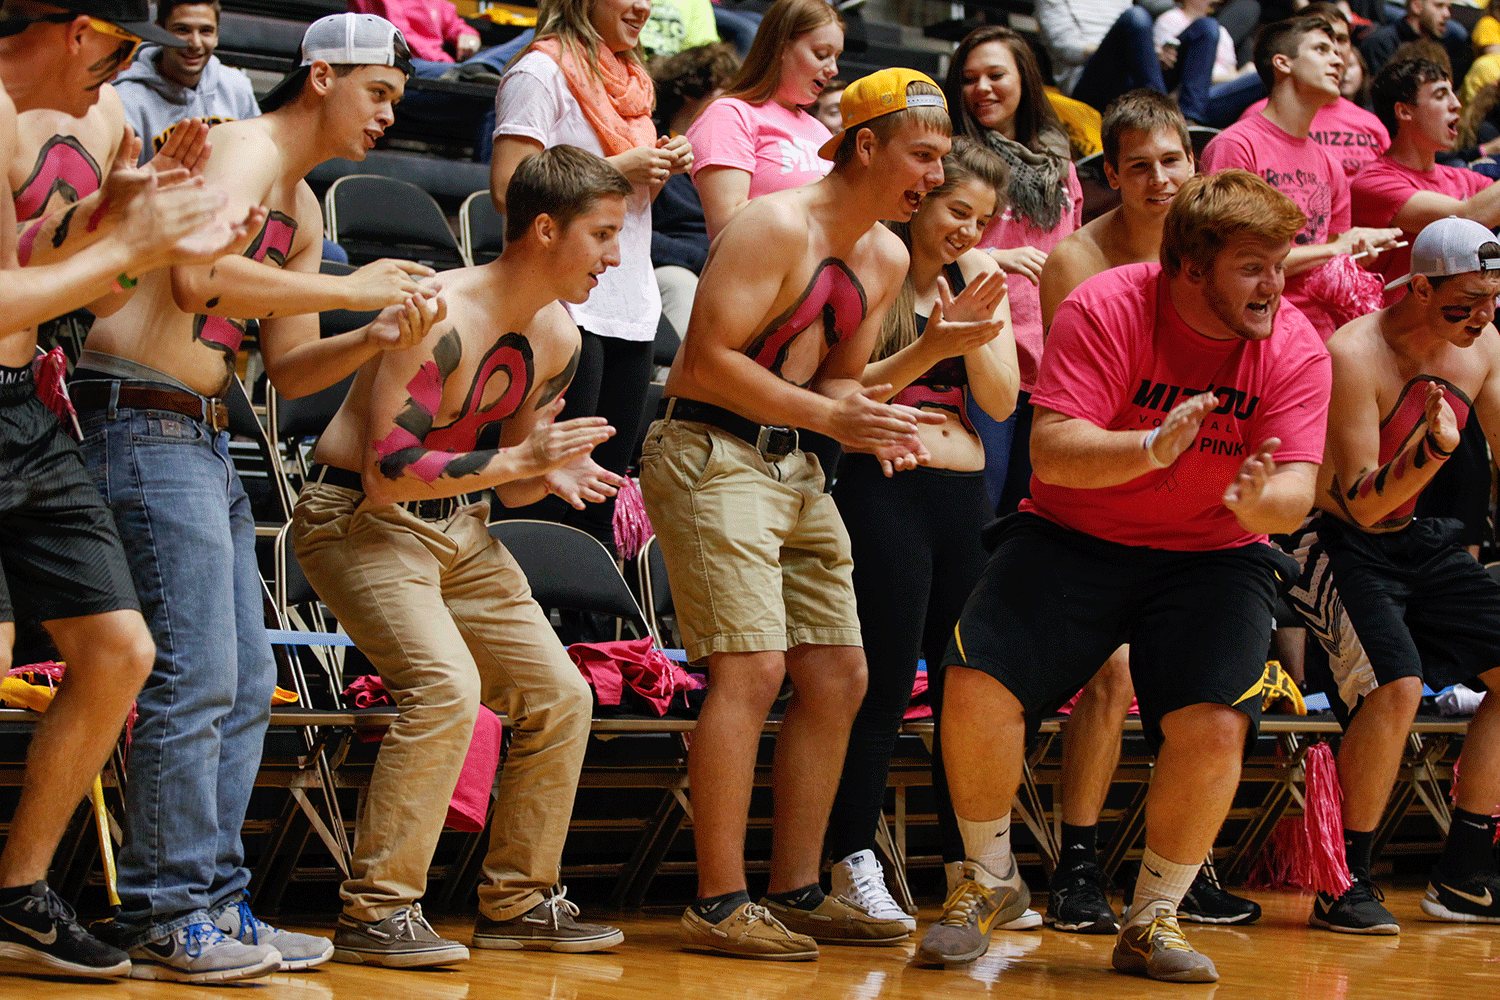 Members of the VolleyZou crew cheer on the Tigers as they serve to Ole Miss during the first set.